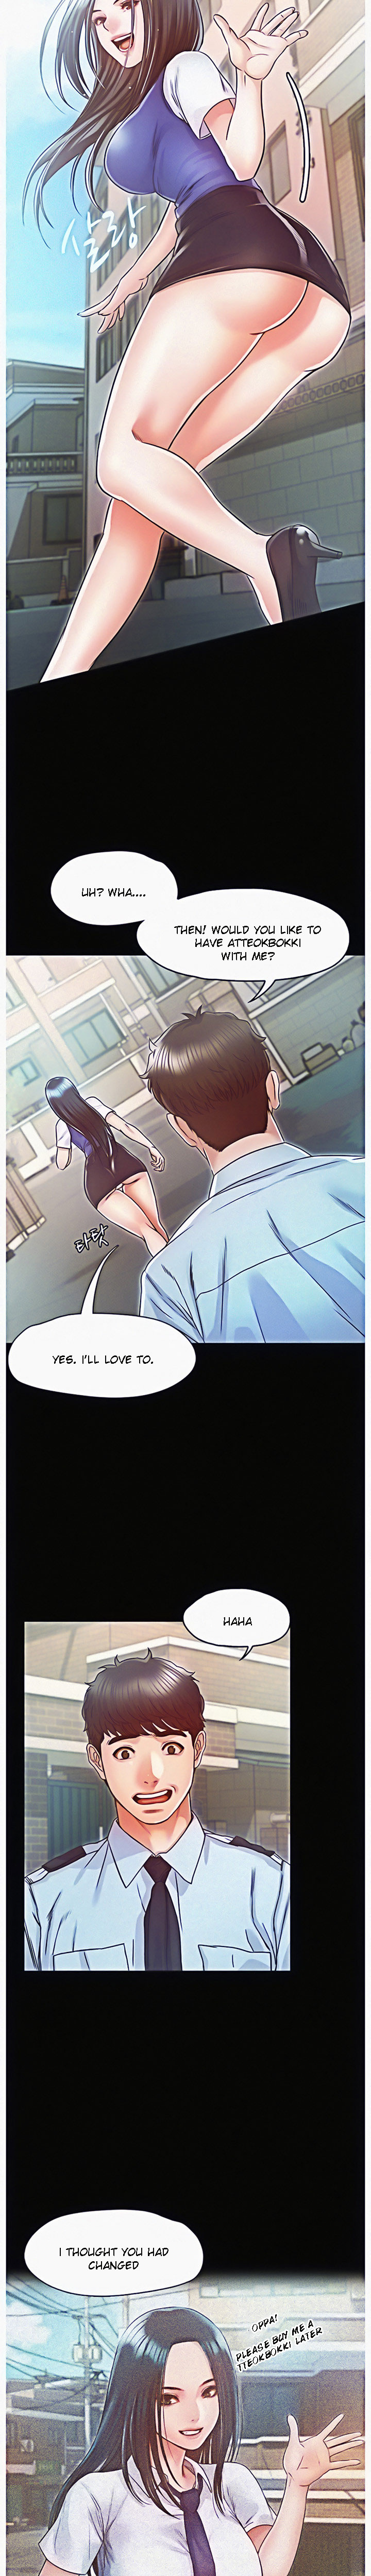 Who Did You Do With? - Chapter 15 Page 18